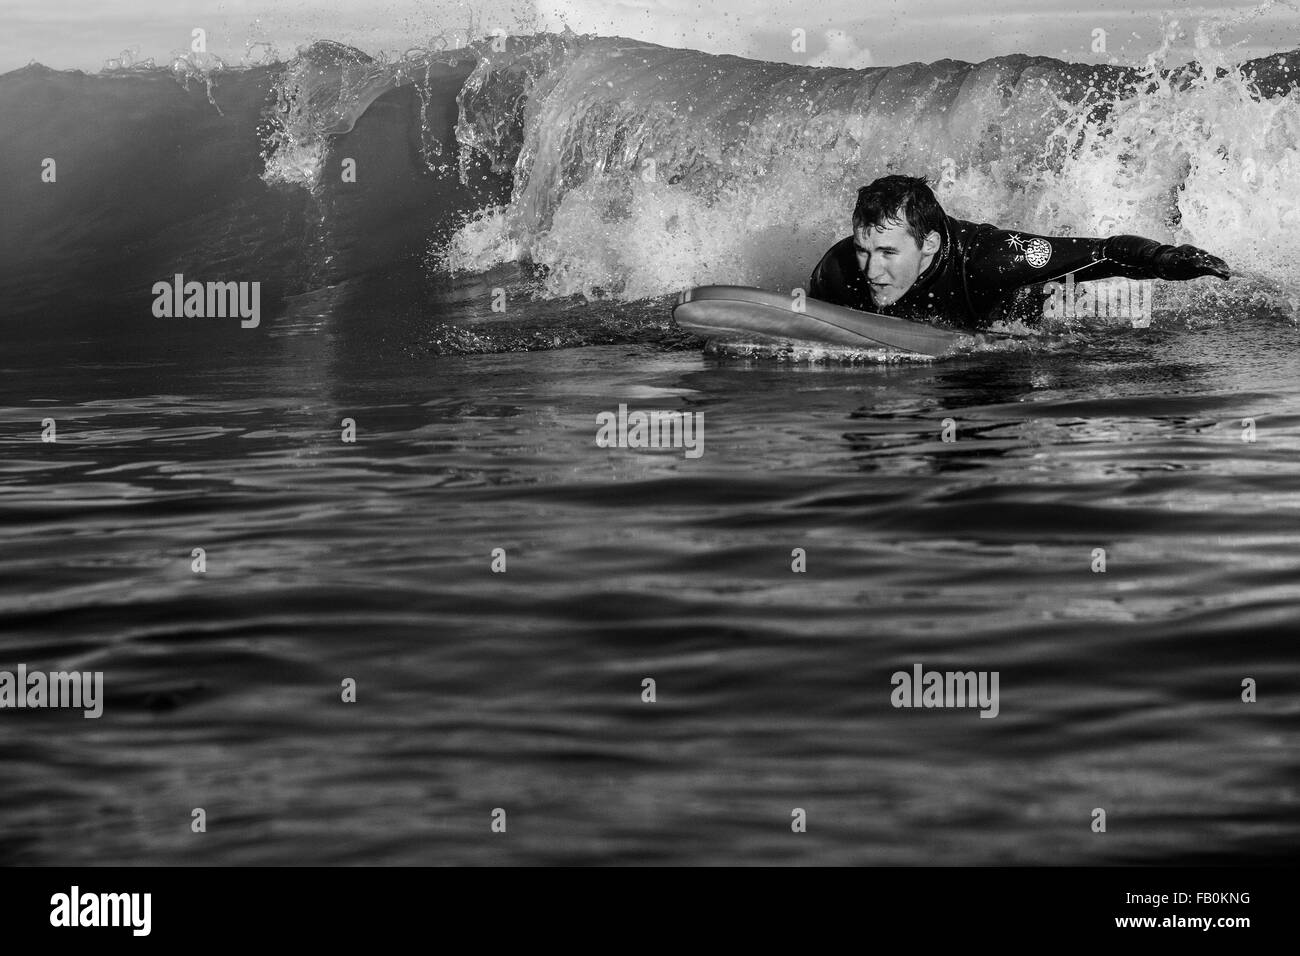 surfers on a wave  in Kent Broadistaris  black and white image  water sea Stock Photo